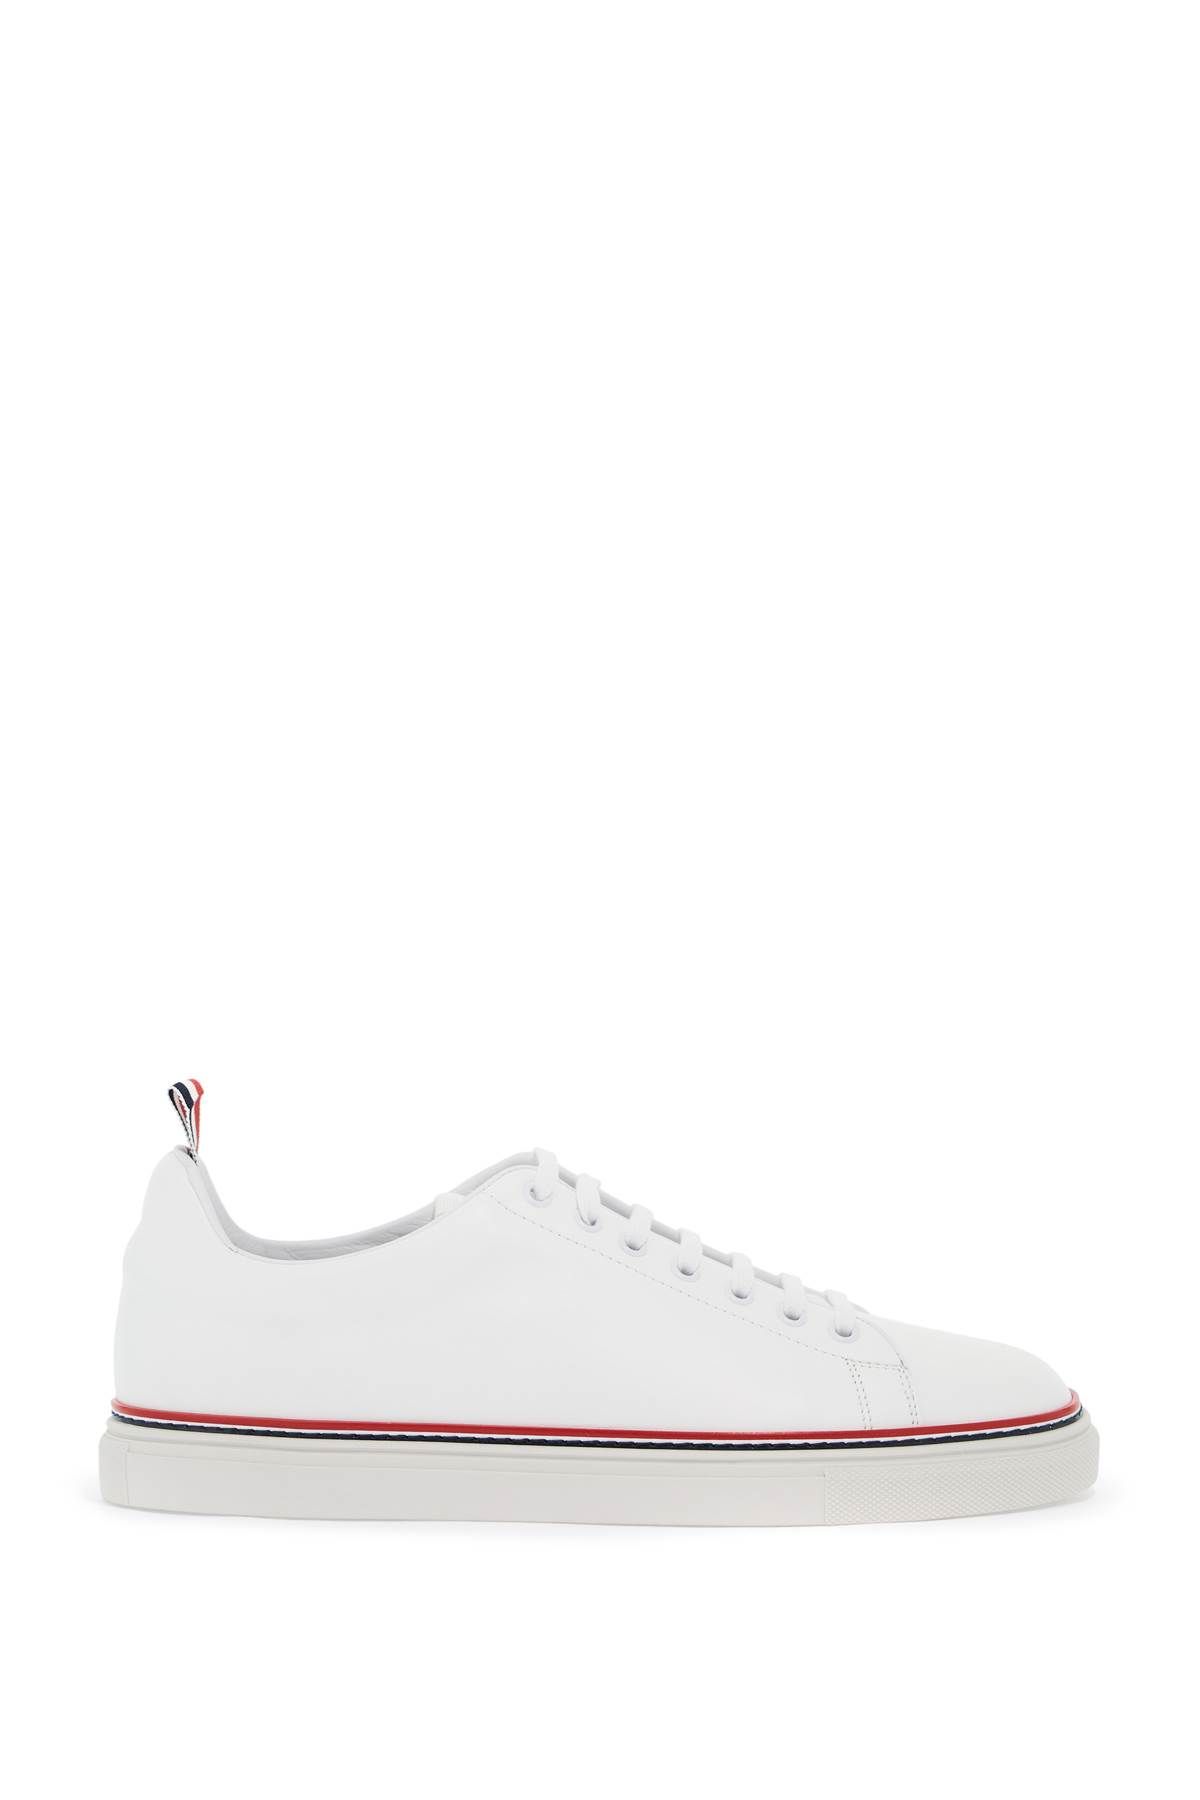 Shop Thom Browne Smooth Leather Sneakers With Tricolor Detail. In White